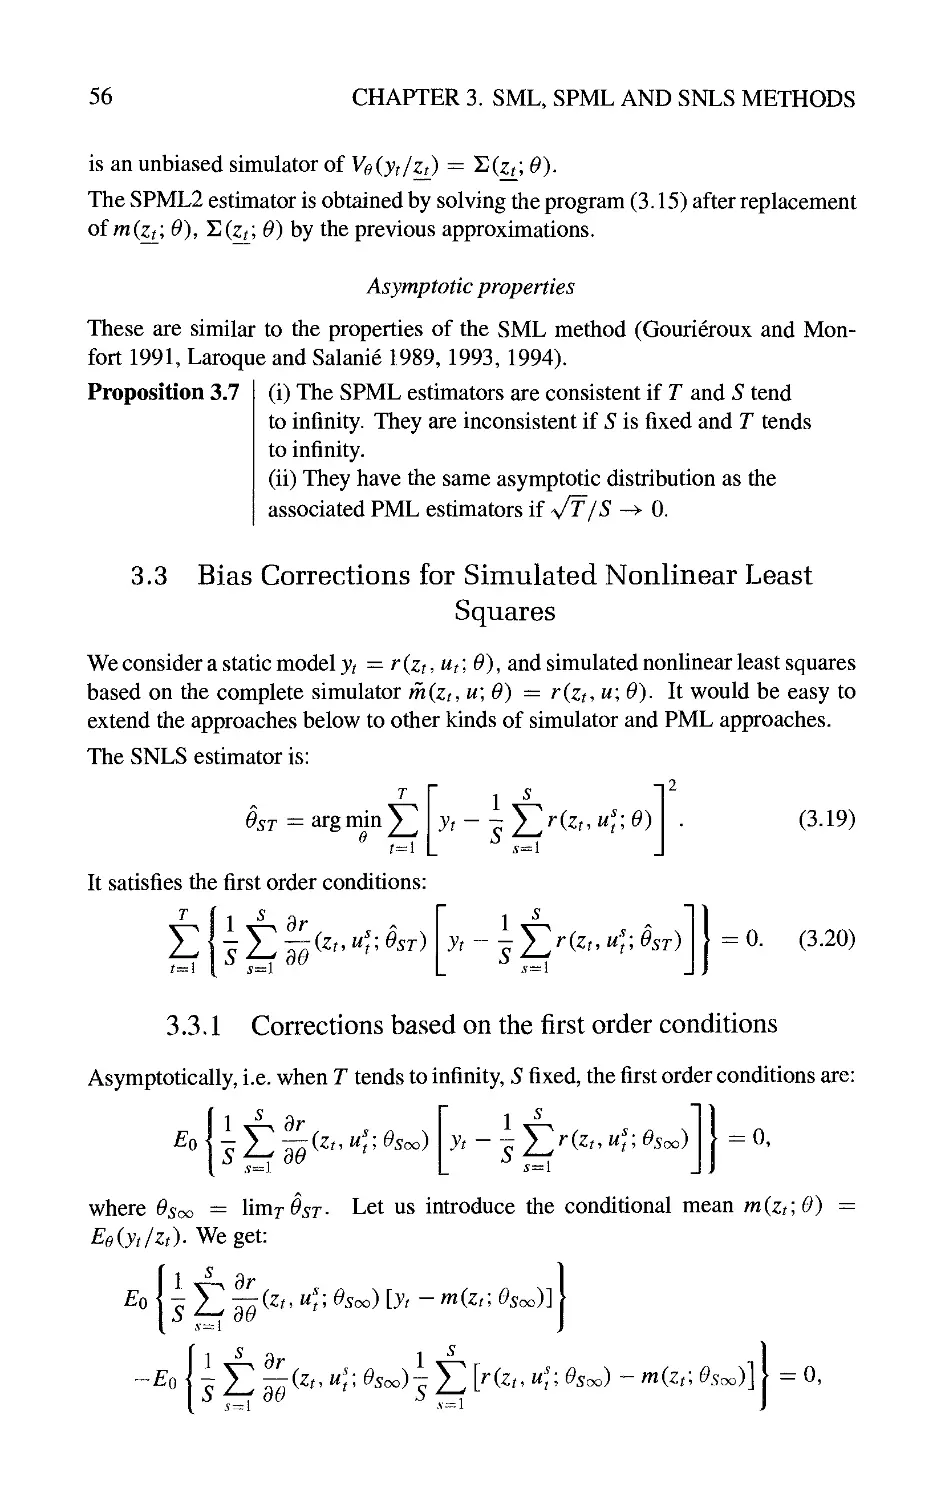 3.3 Bias Corrections for Simulated Nonlinear Least Squares